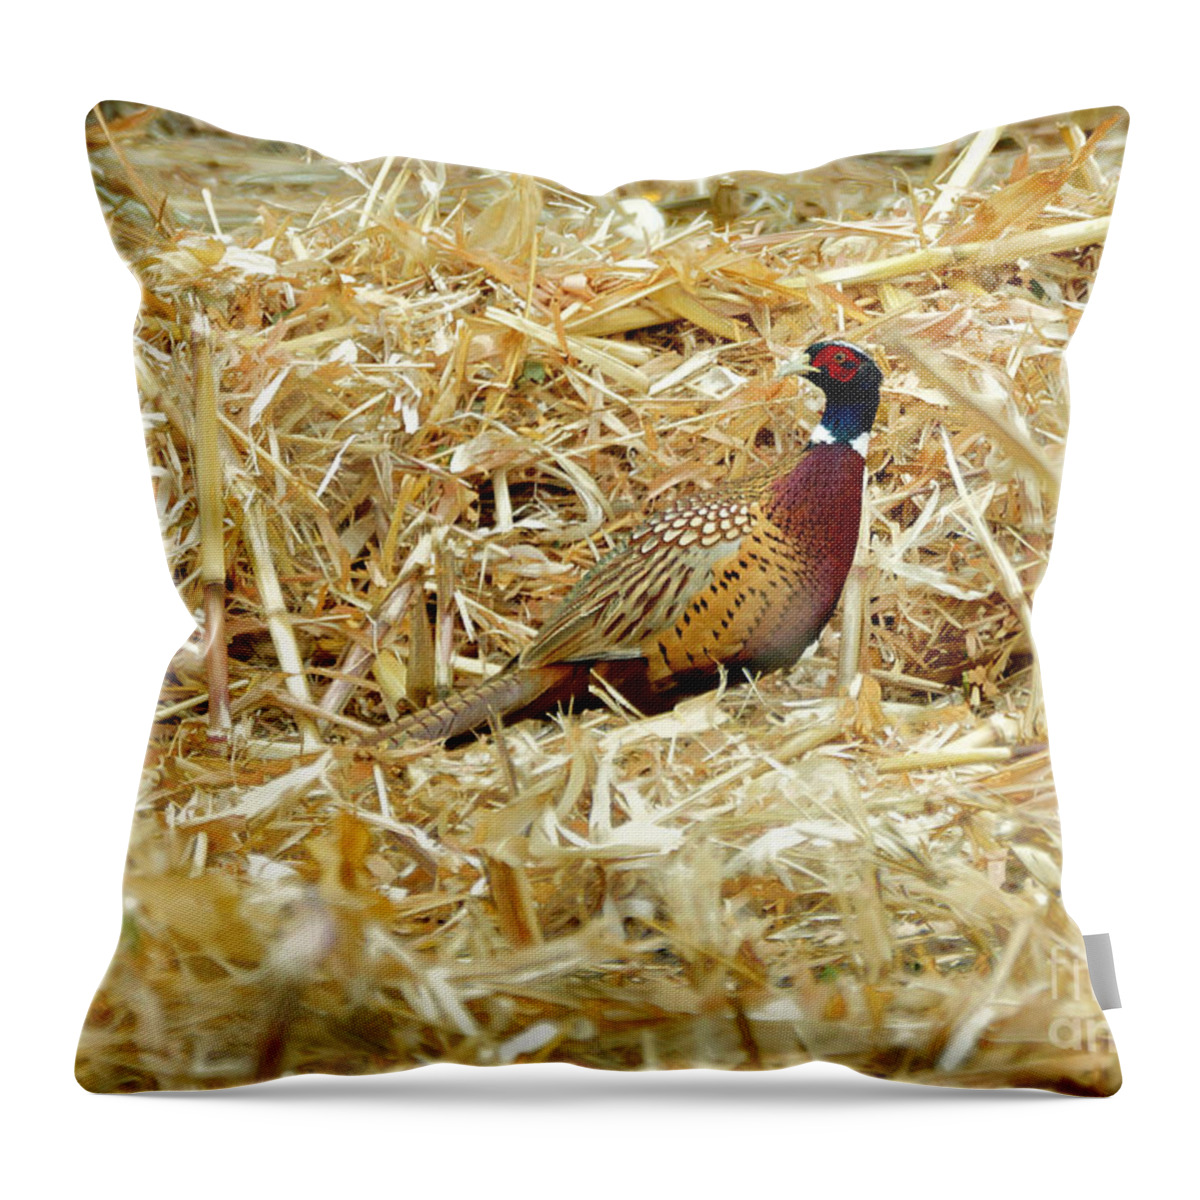 Pheasant Throw Pillow featuring the photograph Undercover by Lori Tordsen